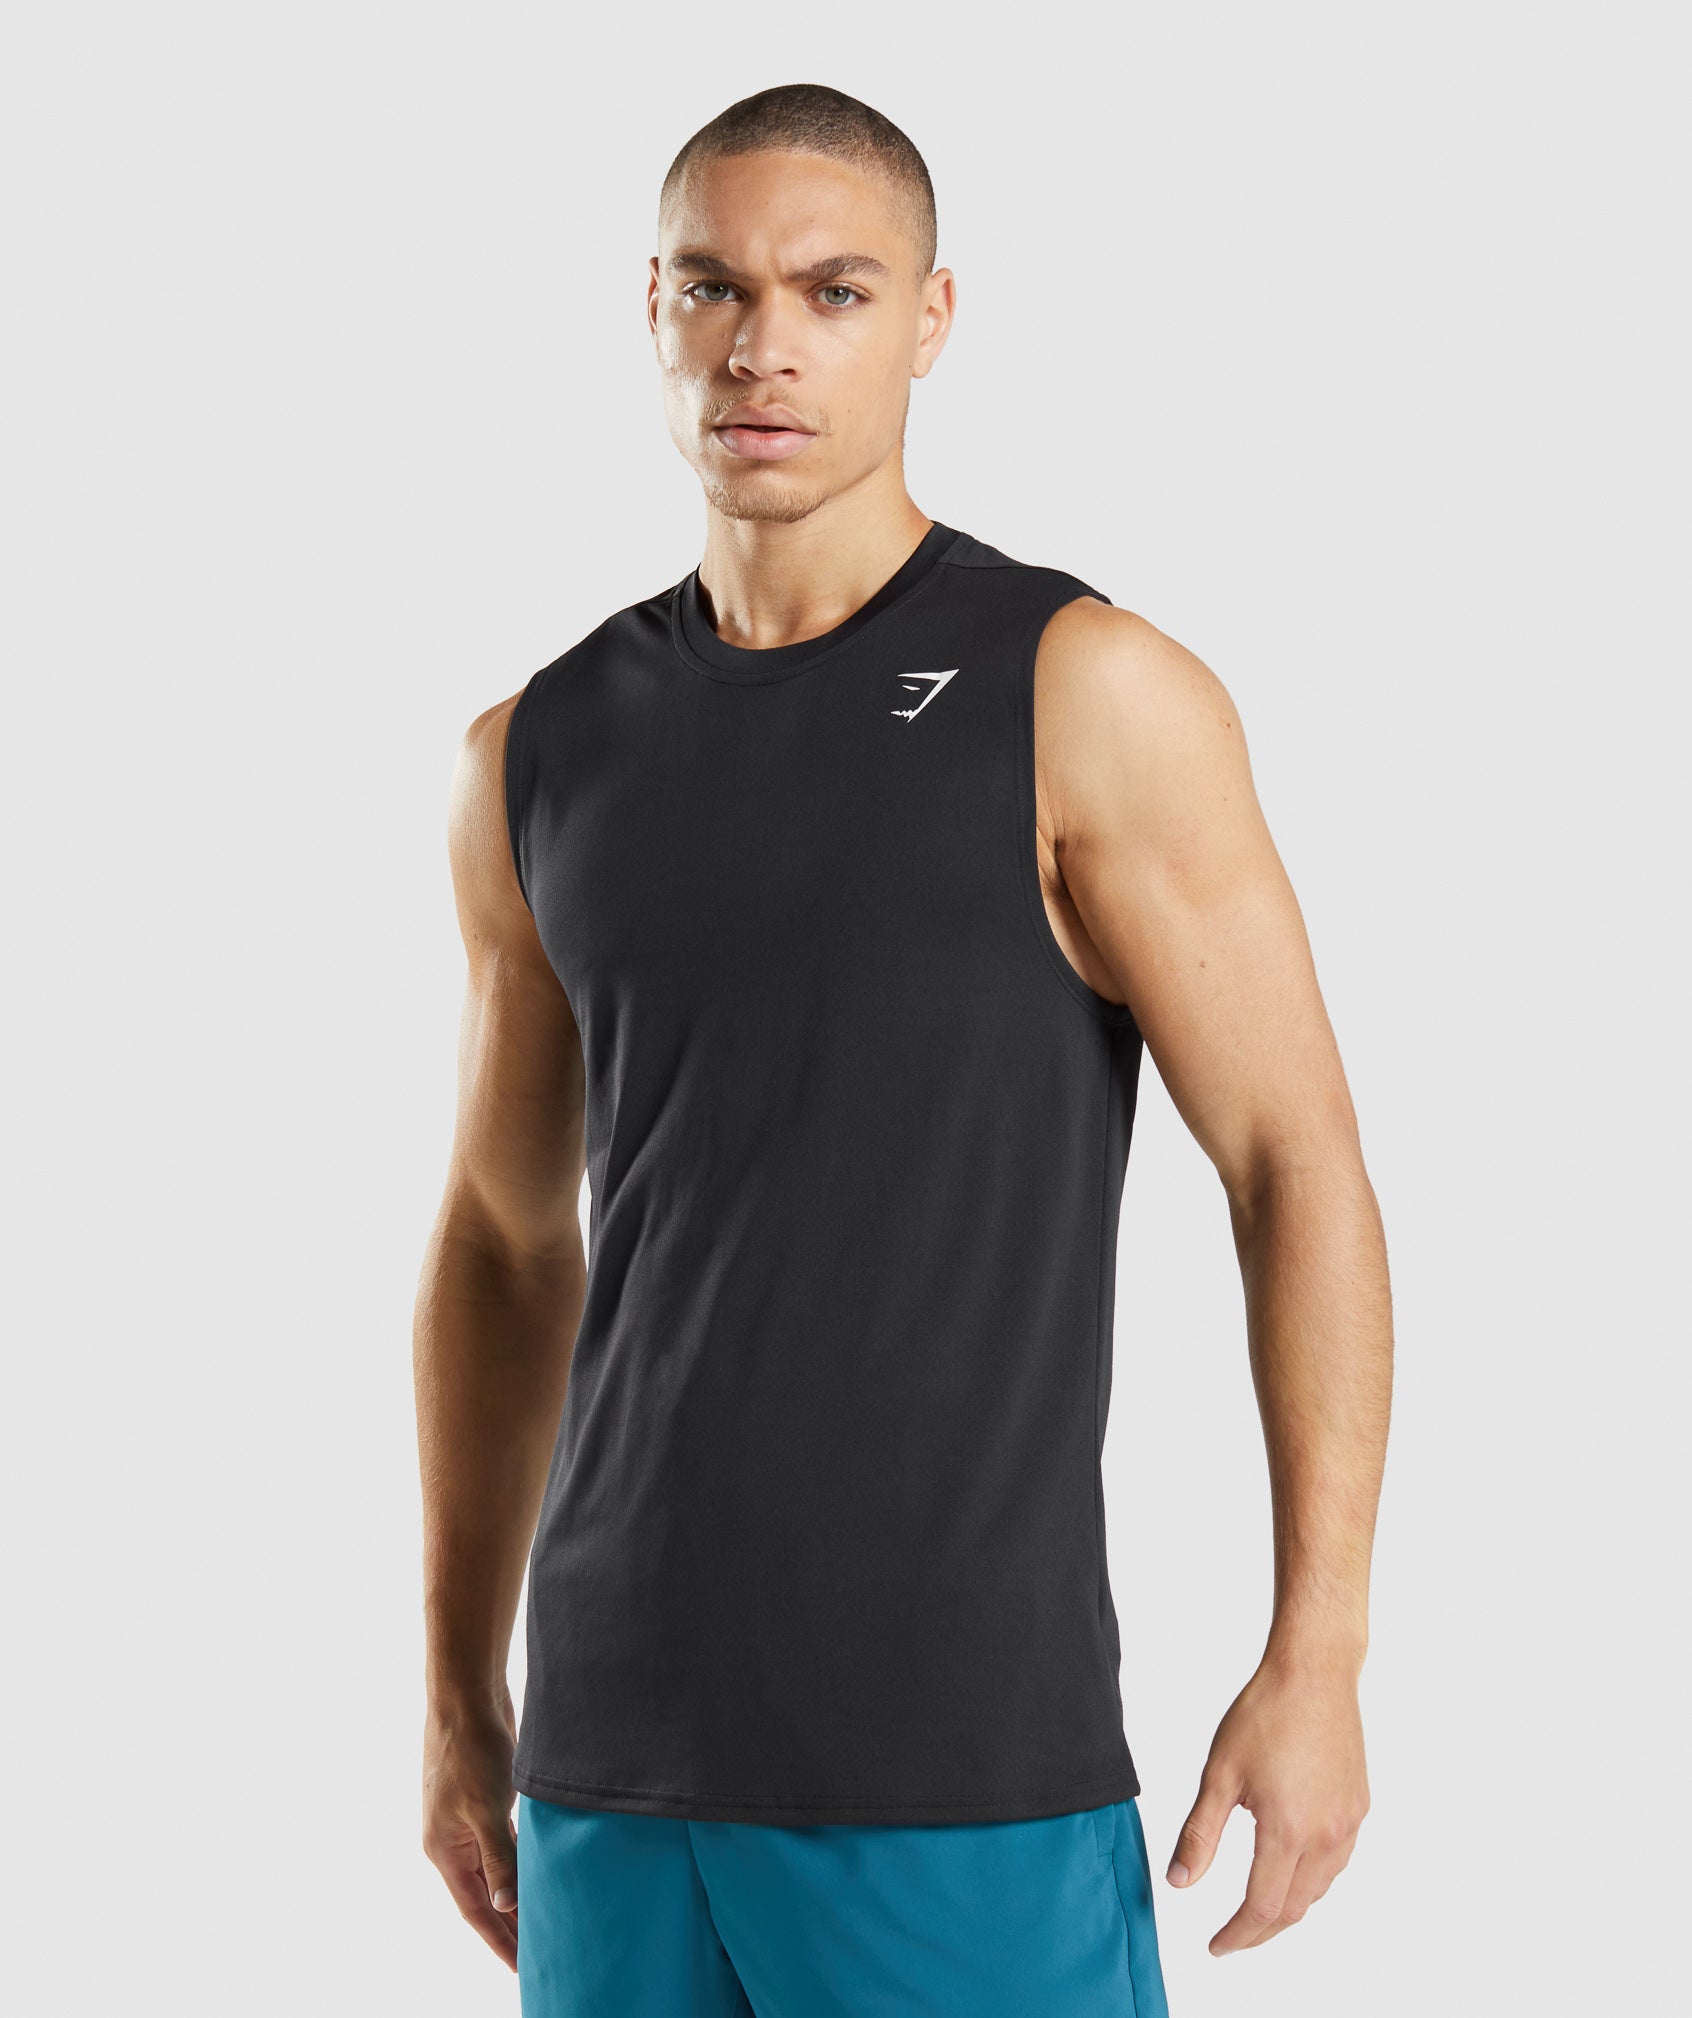 Arrival Sleeveless T-Shirt in Black - view 1